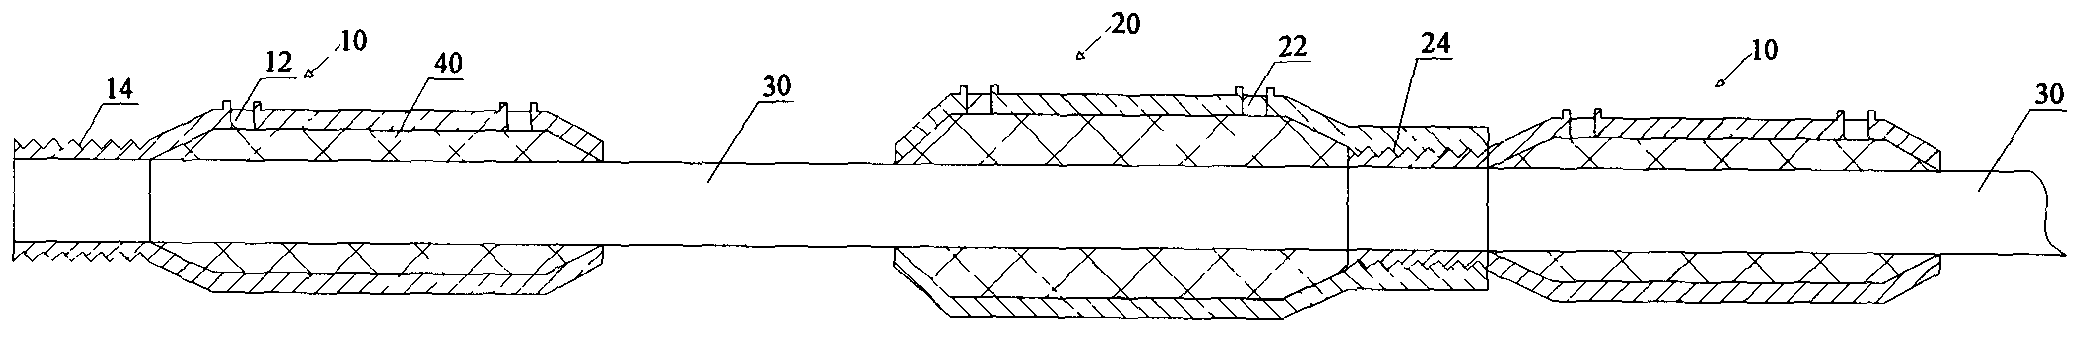 FRP bar connection device, connection method and anchor rod